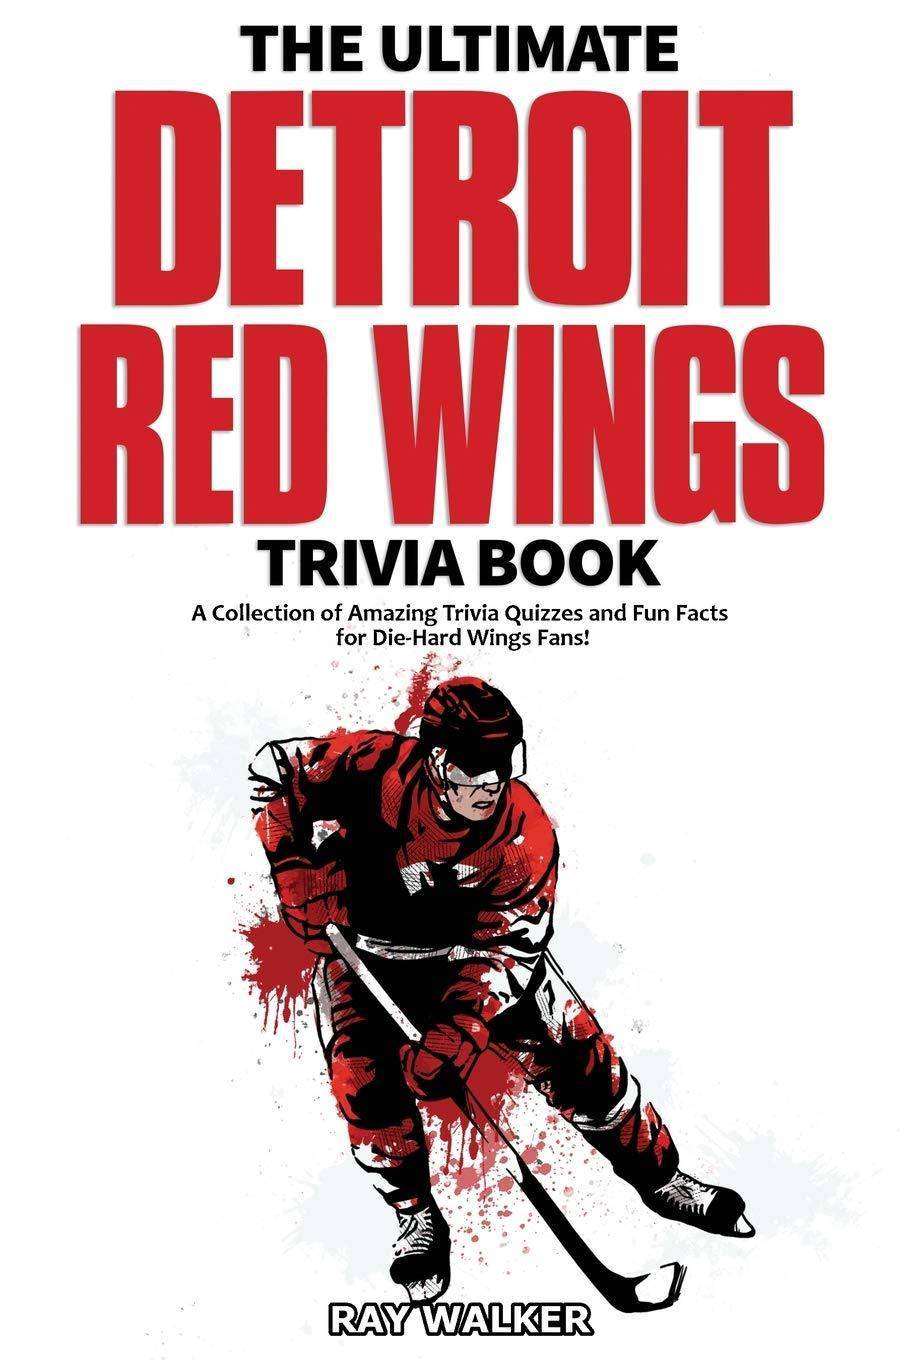 The Ultimate Detroit Red Wings Trivia Book - SureShot Books Publishing LLC